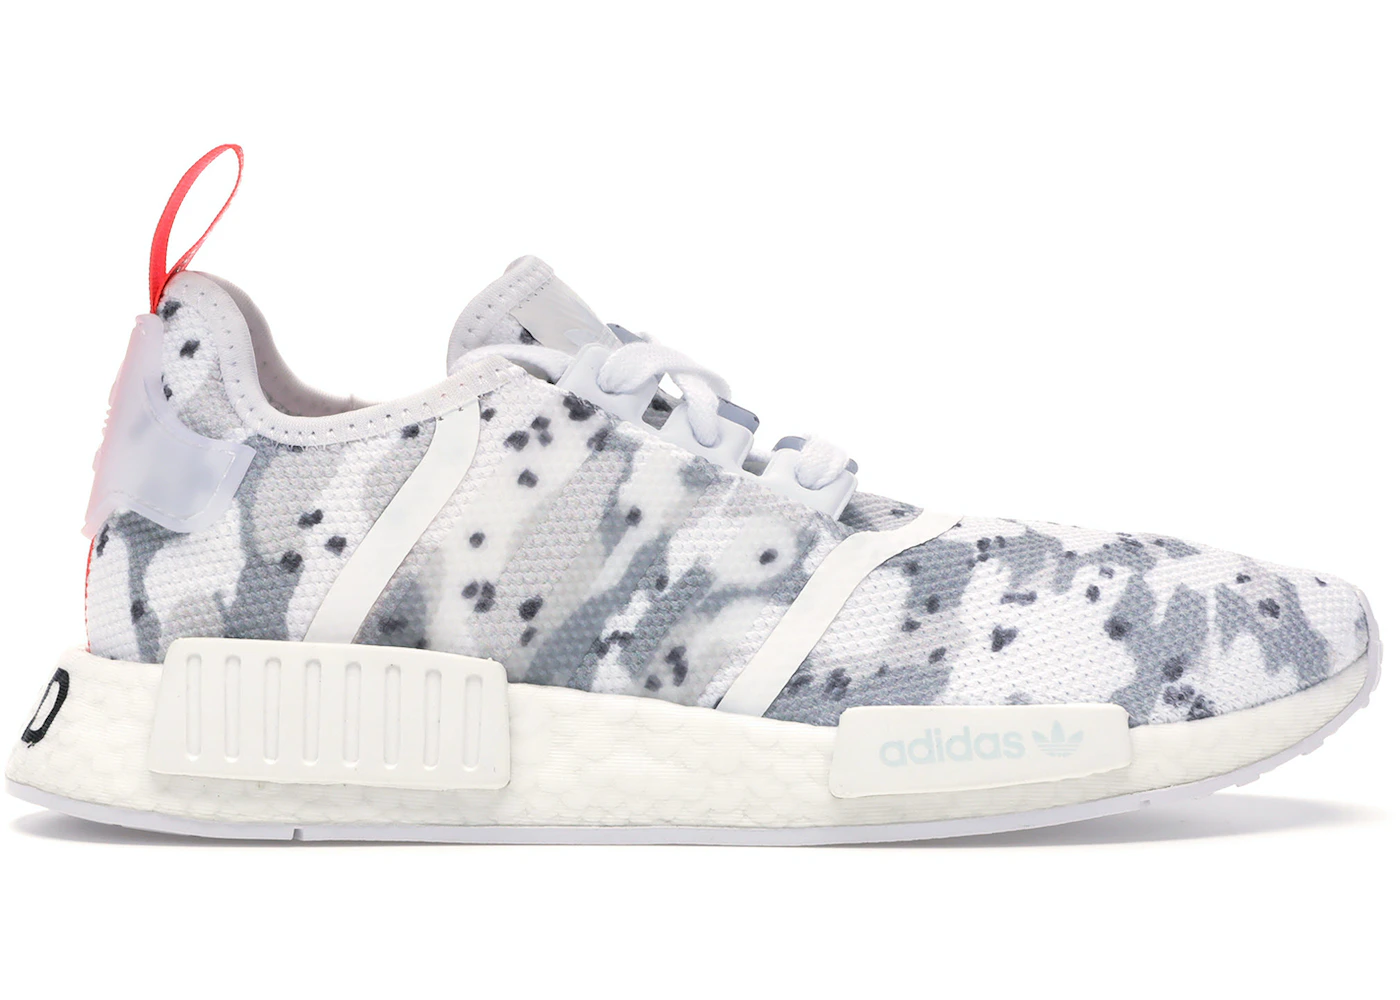 adidas NMD R1 Cloud White Solar Red (Women's) - G27933 - US